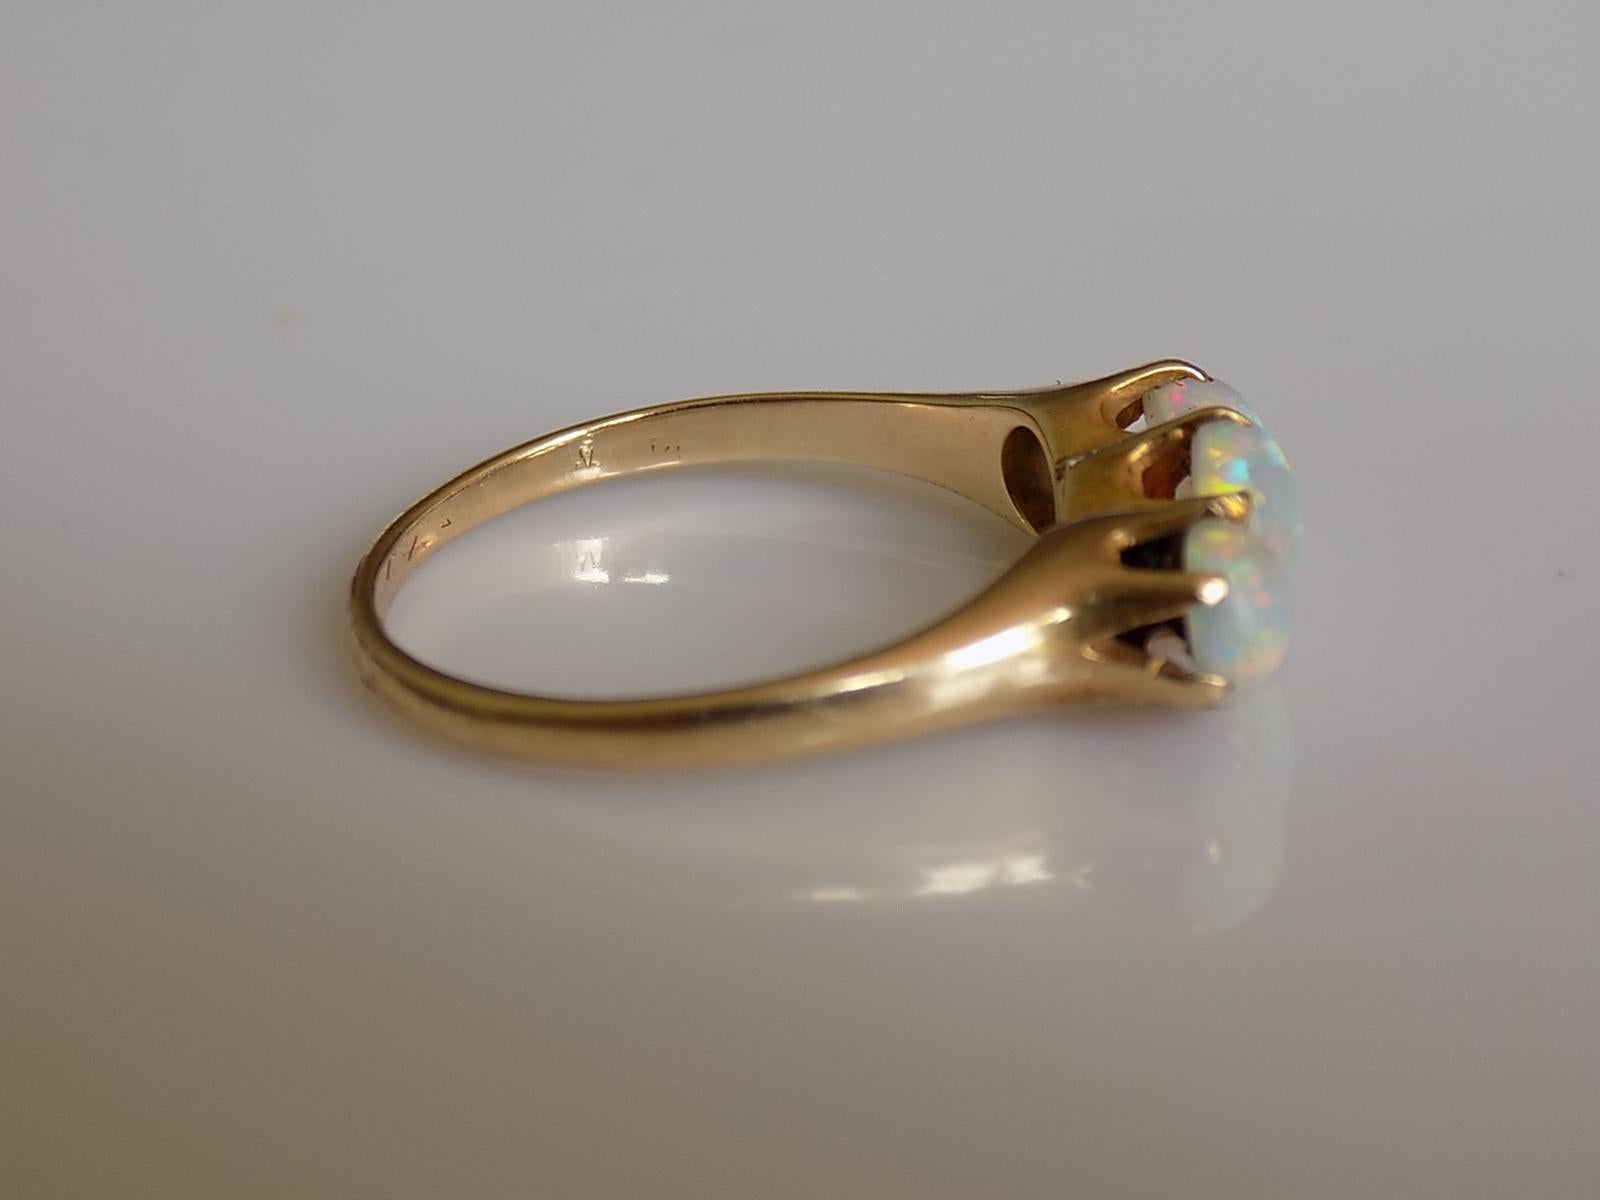 A Lovely Victorian 18 Carat Gold and three Australian Opal ring.
Size M UK, 6.5 US (can be sized).
Height of the face including claws 6mm.
Weight 2.4gr.
Unmarked, tested 18 Carat Gold.
The ring in very good condition and ready to wear.